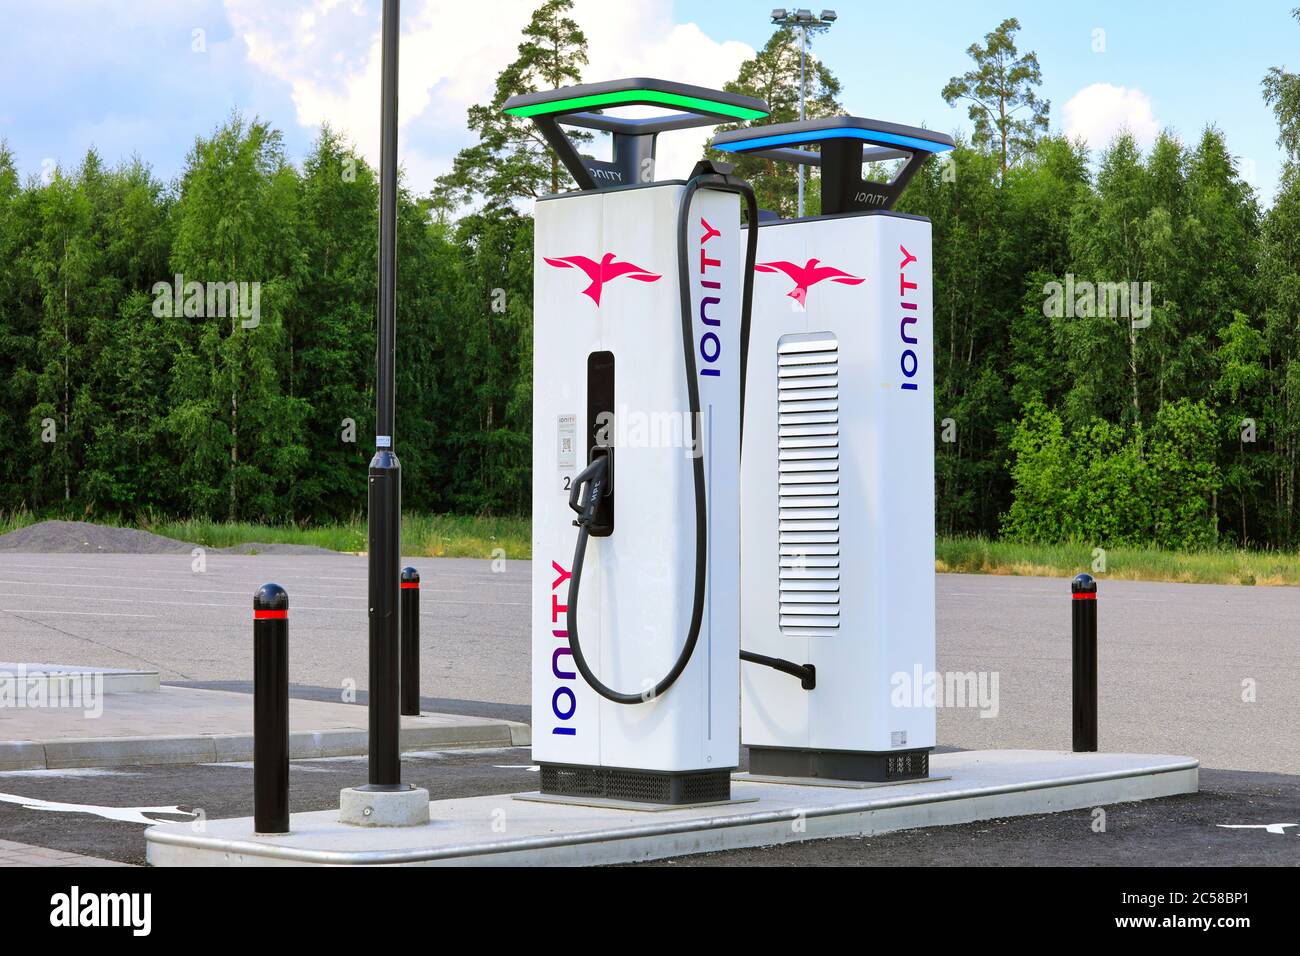 IONITY high-power-charging (HPC) units for electric vehicles. IONITY is a joint venture to facilitate travel in Europe. Paimio, Finland. June 28, 2020 Stock Photo